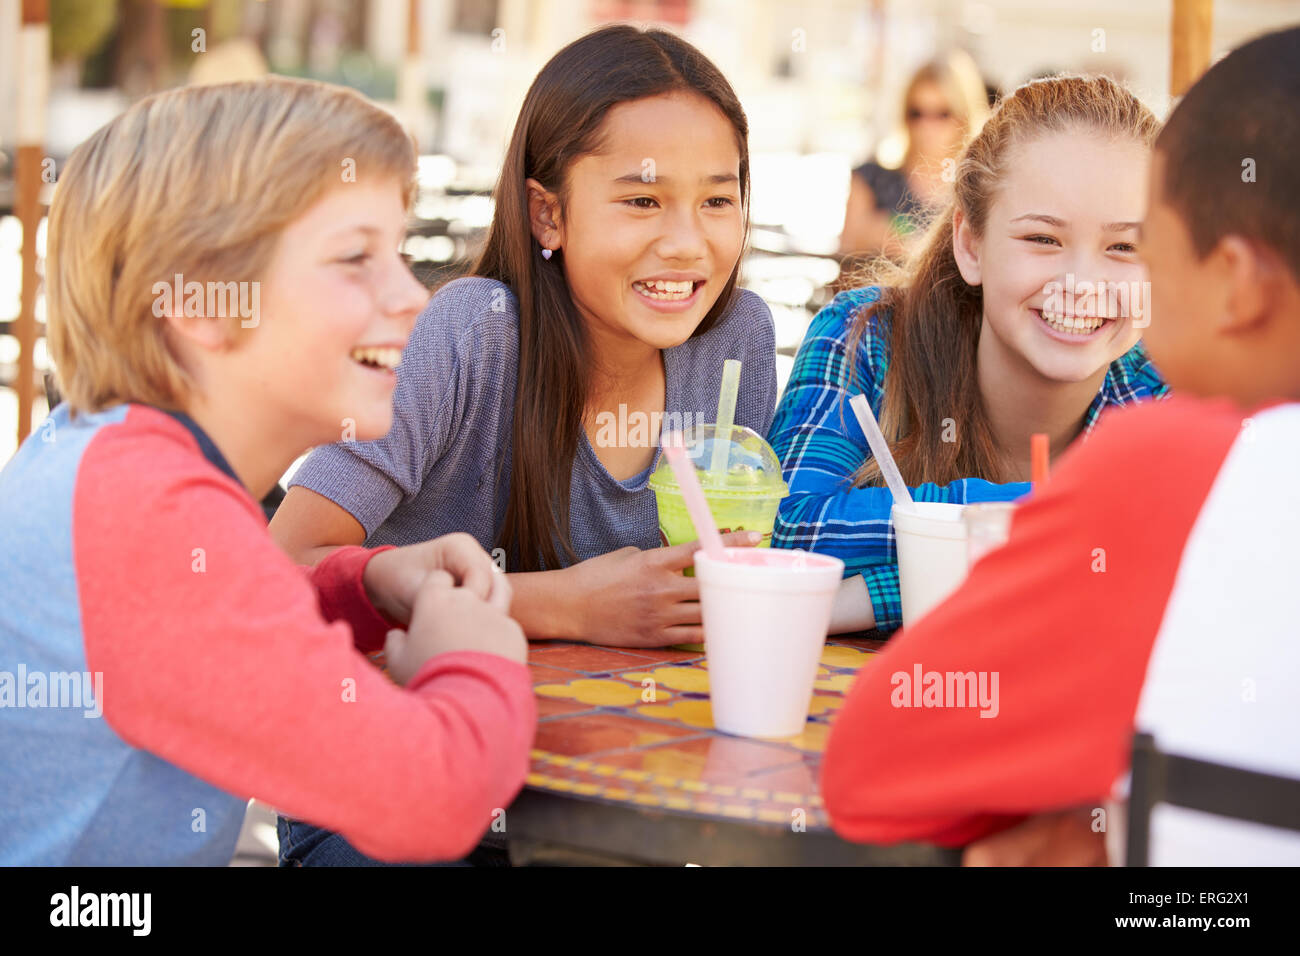 Group Of Children Hanging Out Together In CafÅ½ Stock Photo